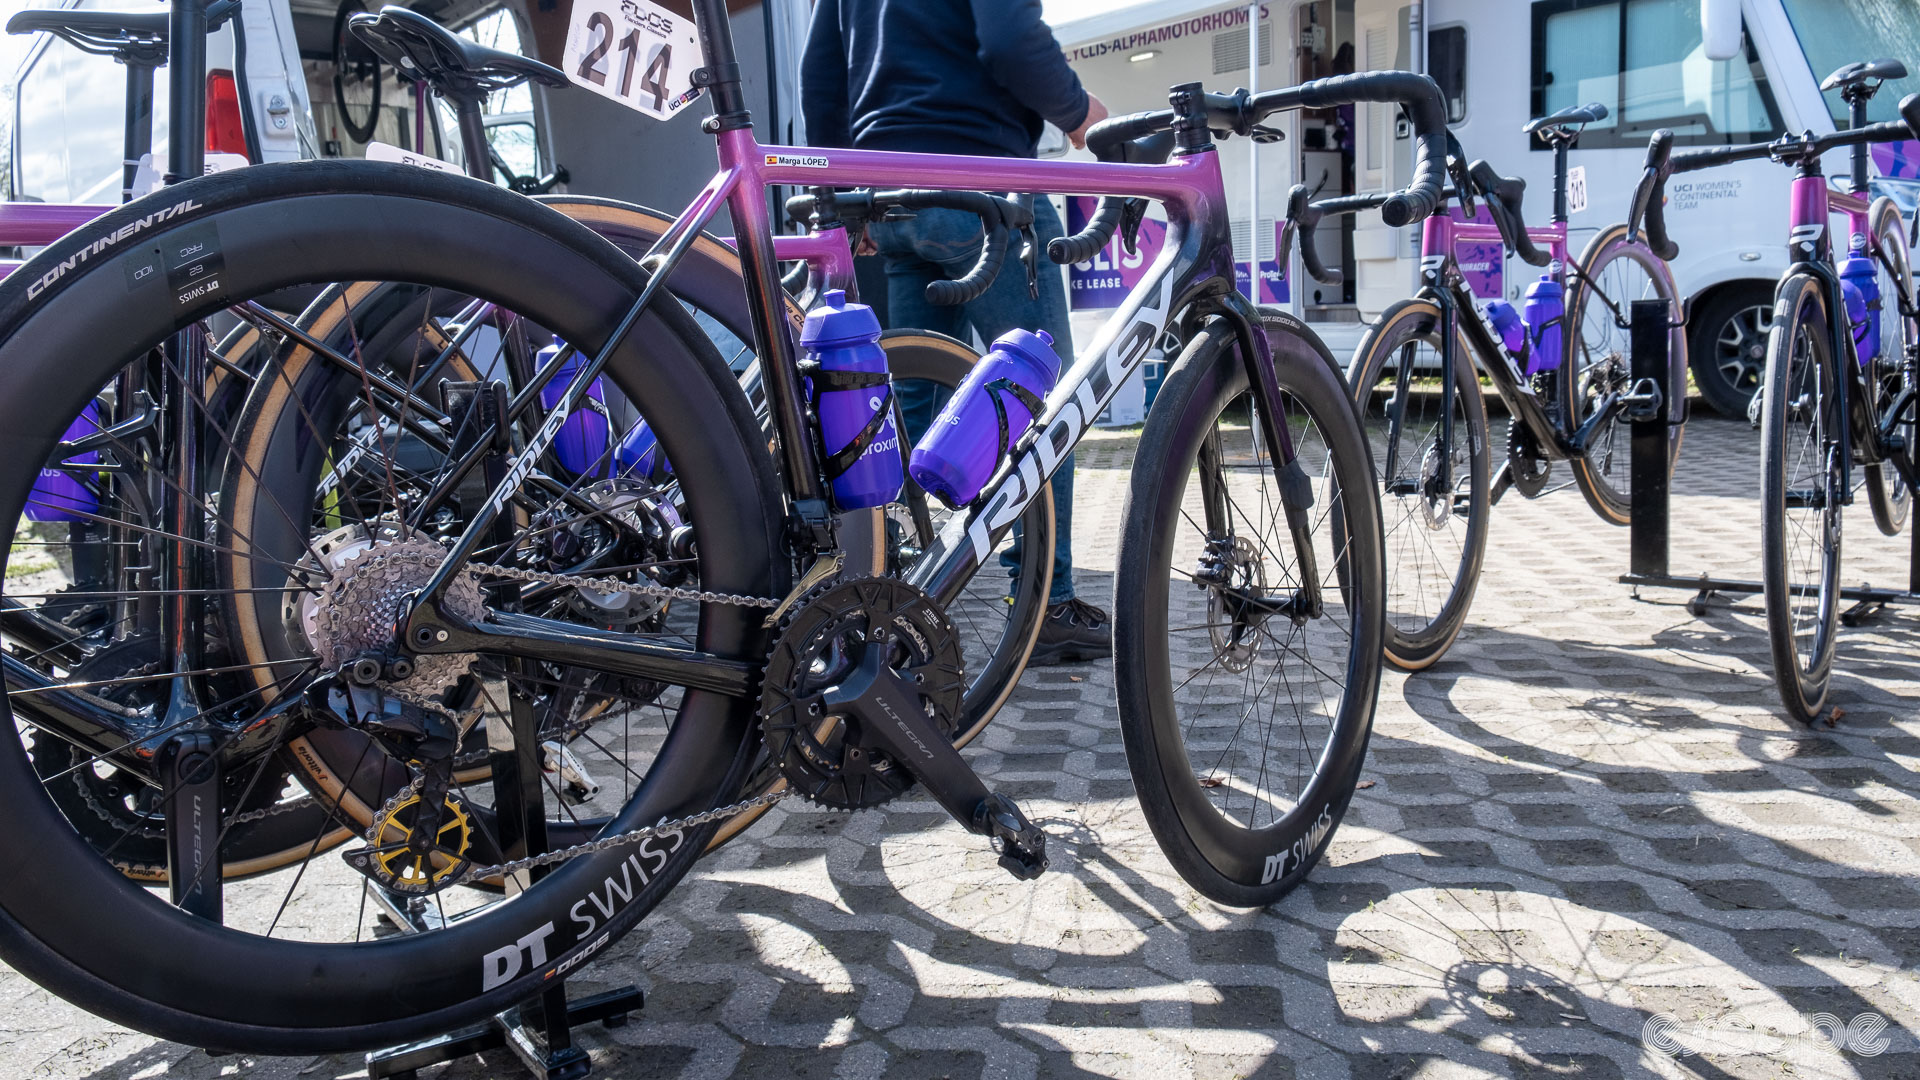 The image shows Marga López's Ridley Helium SLX side on with the drivetrain in focus.